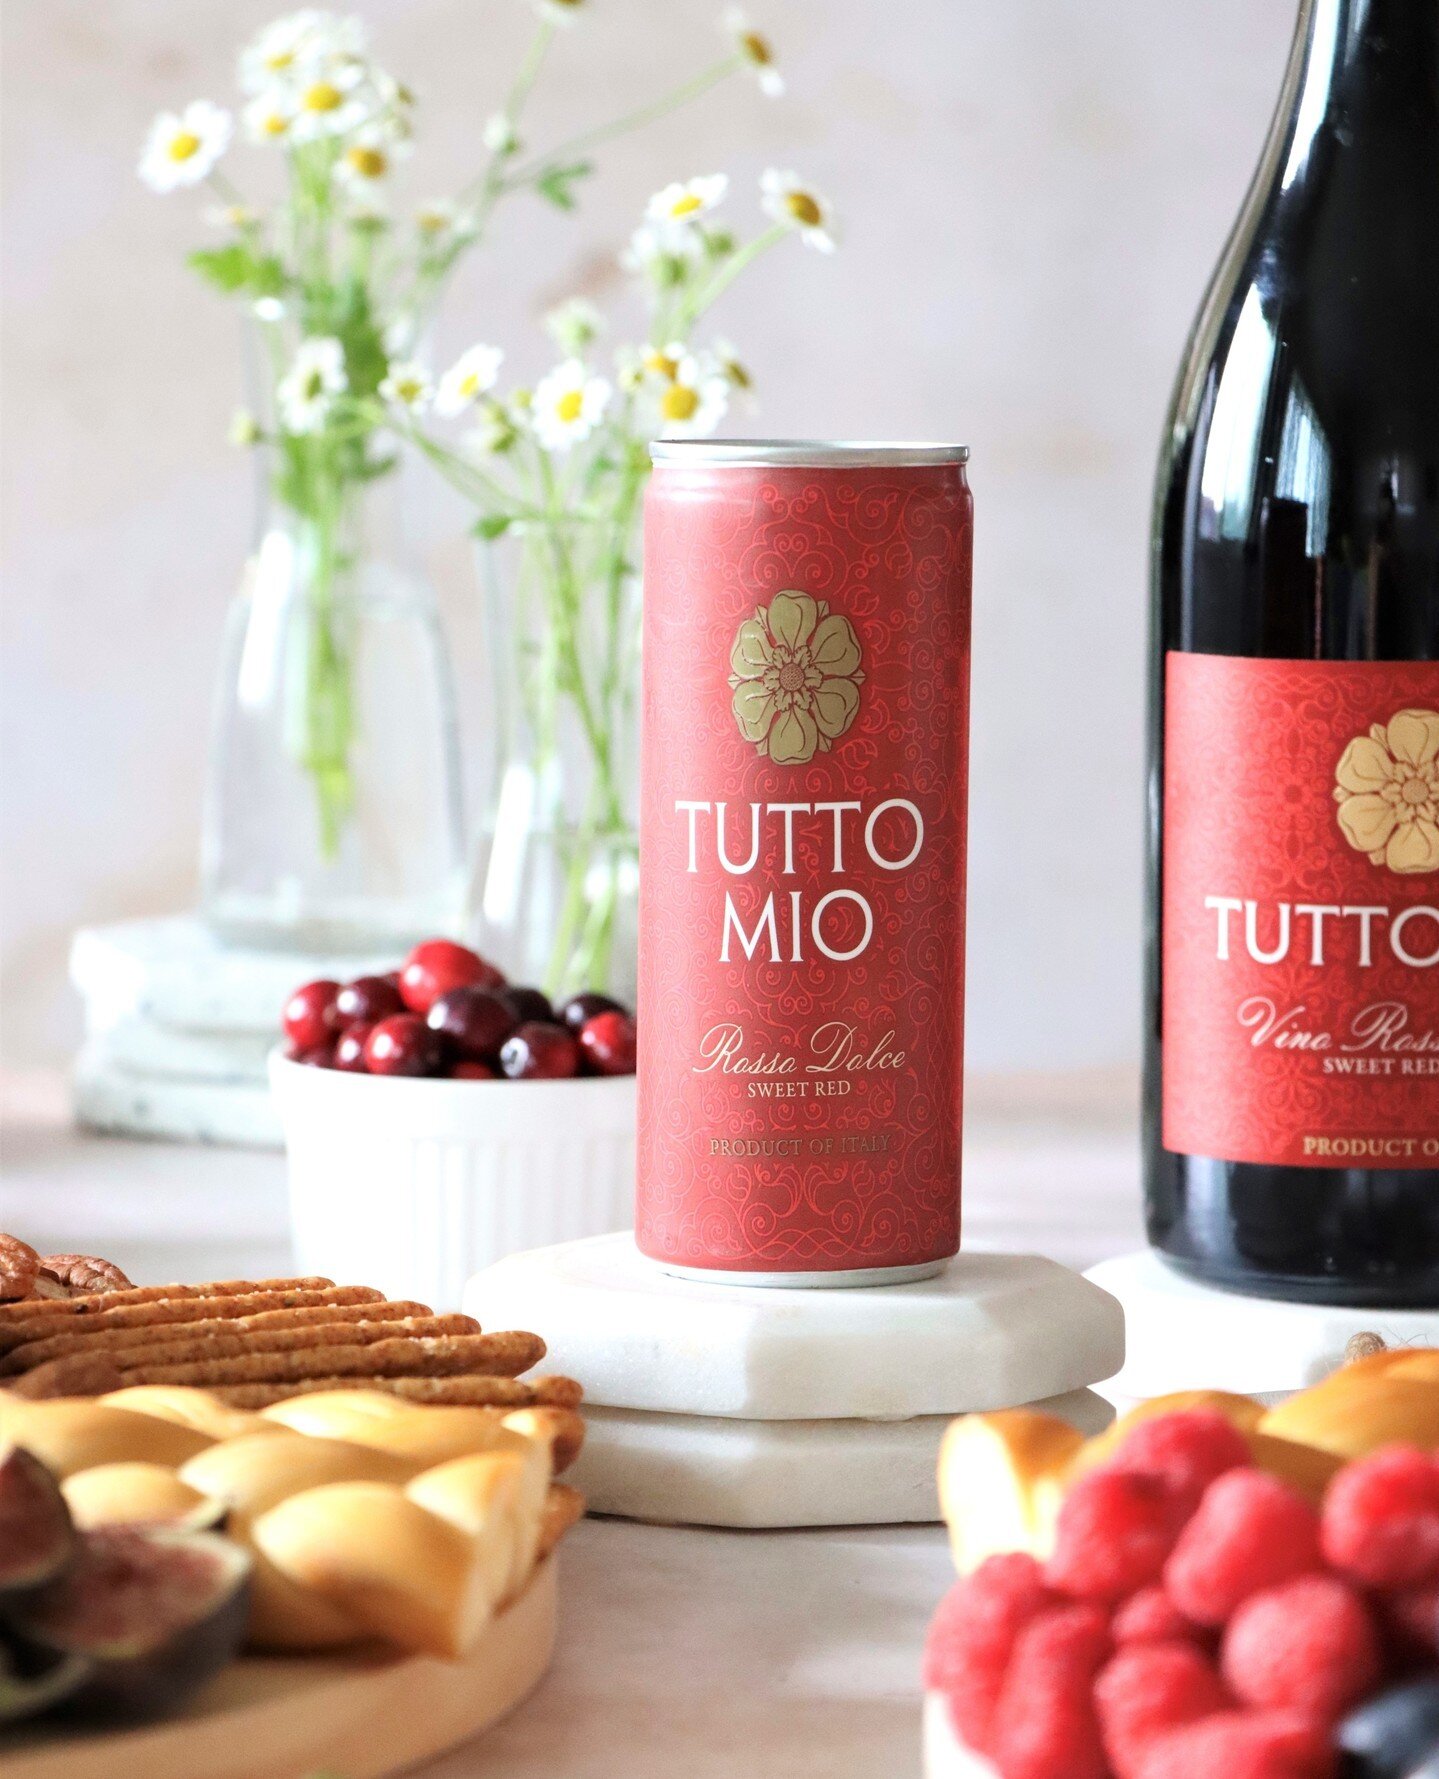 Look at the time &mdash; Wine Wednesday, again! Are you doing a laid-back wine hour on the couch or cooking up a fancy pairing? Our Tutto Mio pairs amazingly with both!